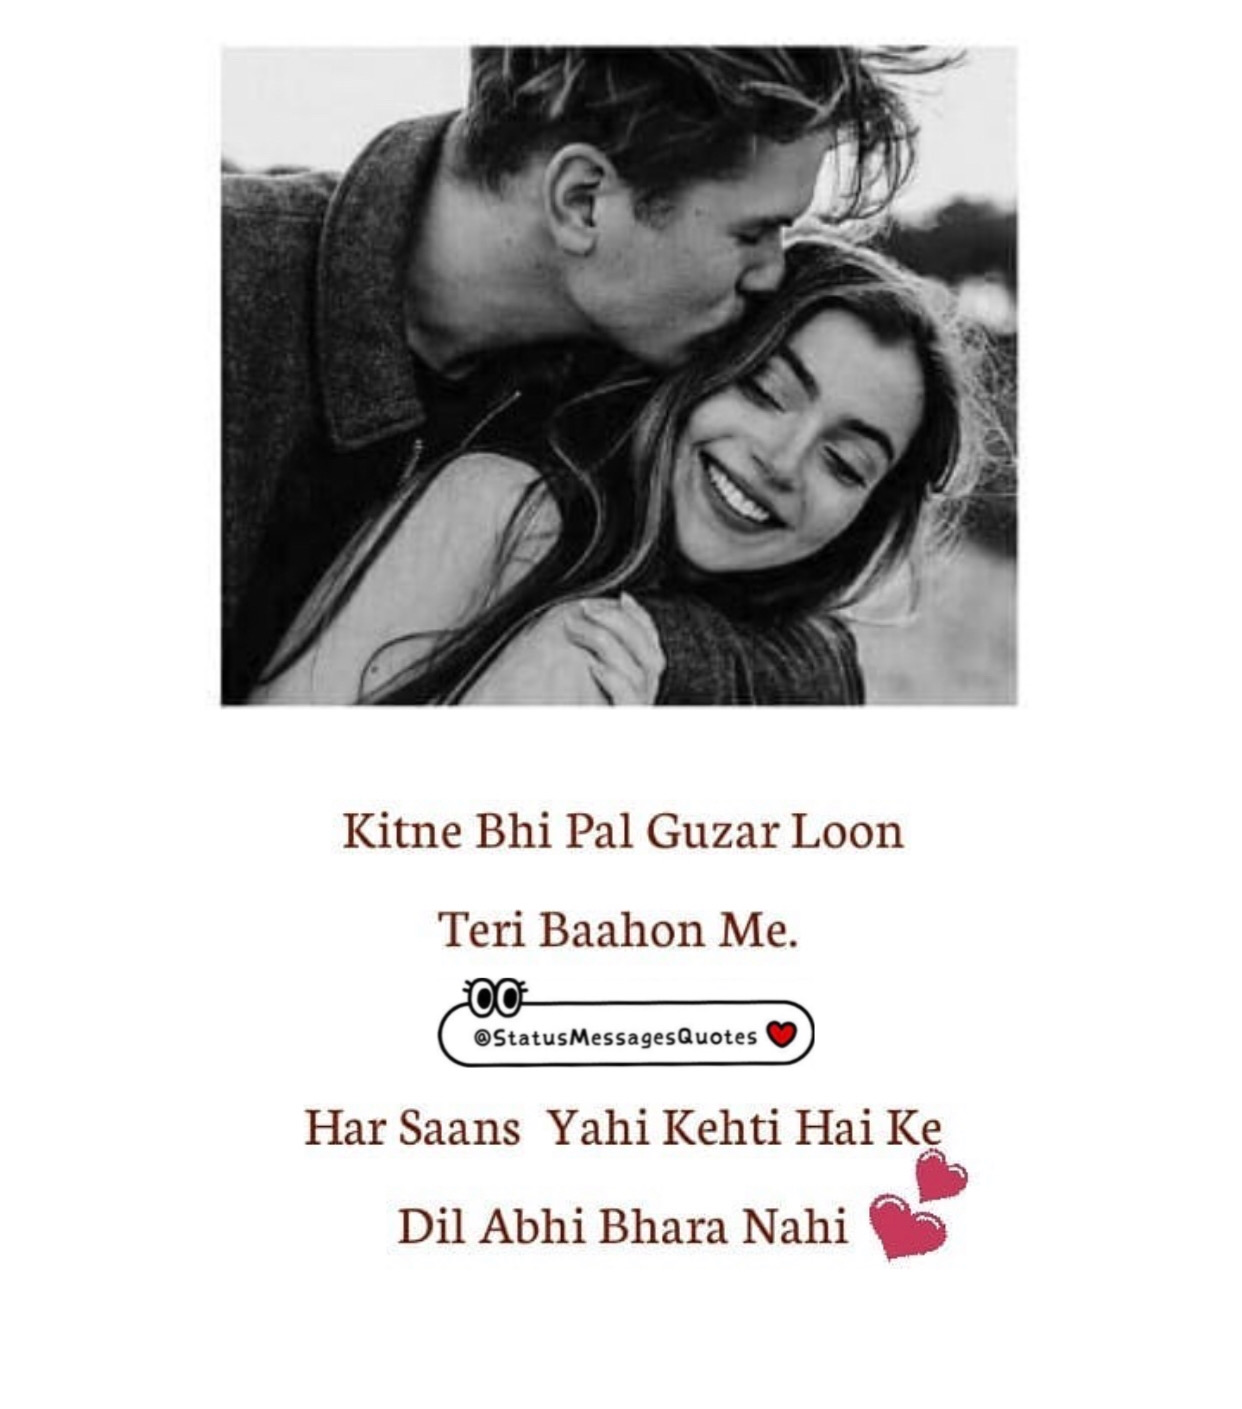 Best Love Status Messages Quotes - Pictures Shayari